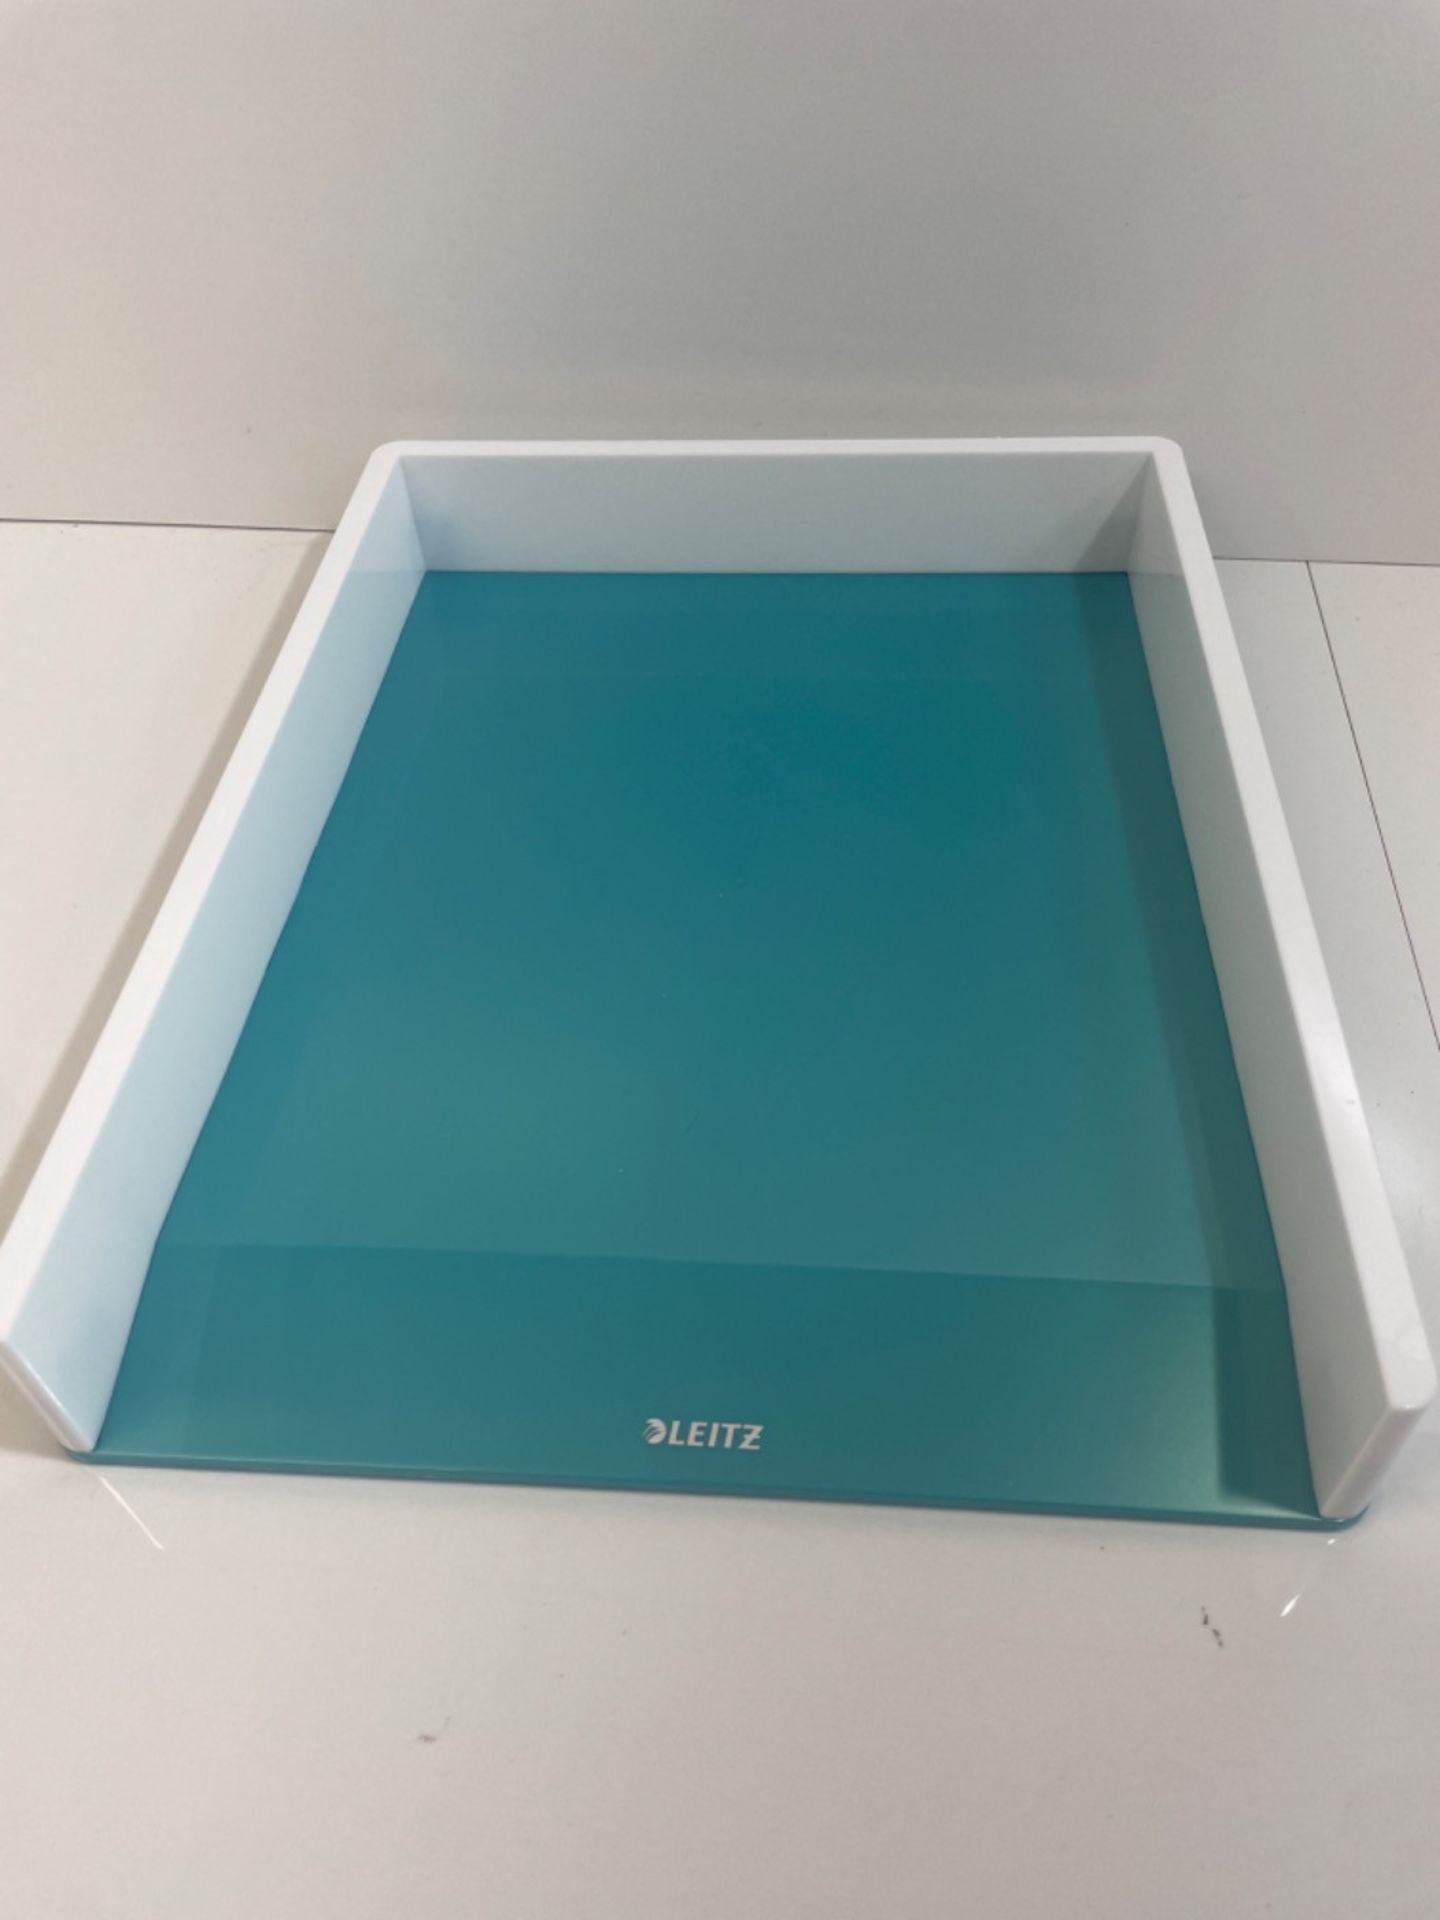 Leitz WOW Letter Tray Dual Colour, Ice Blue - Image 2 of 3